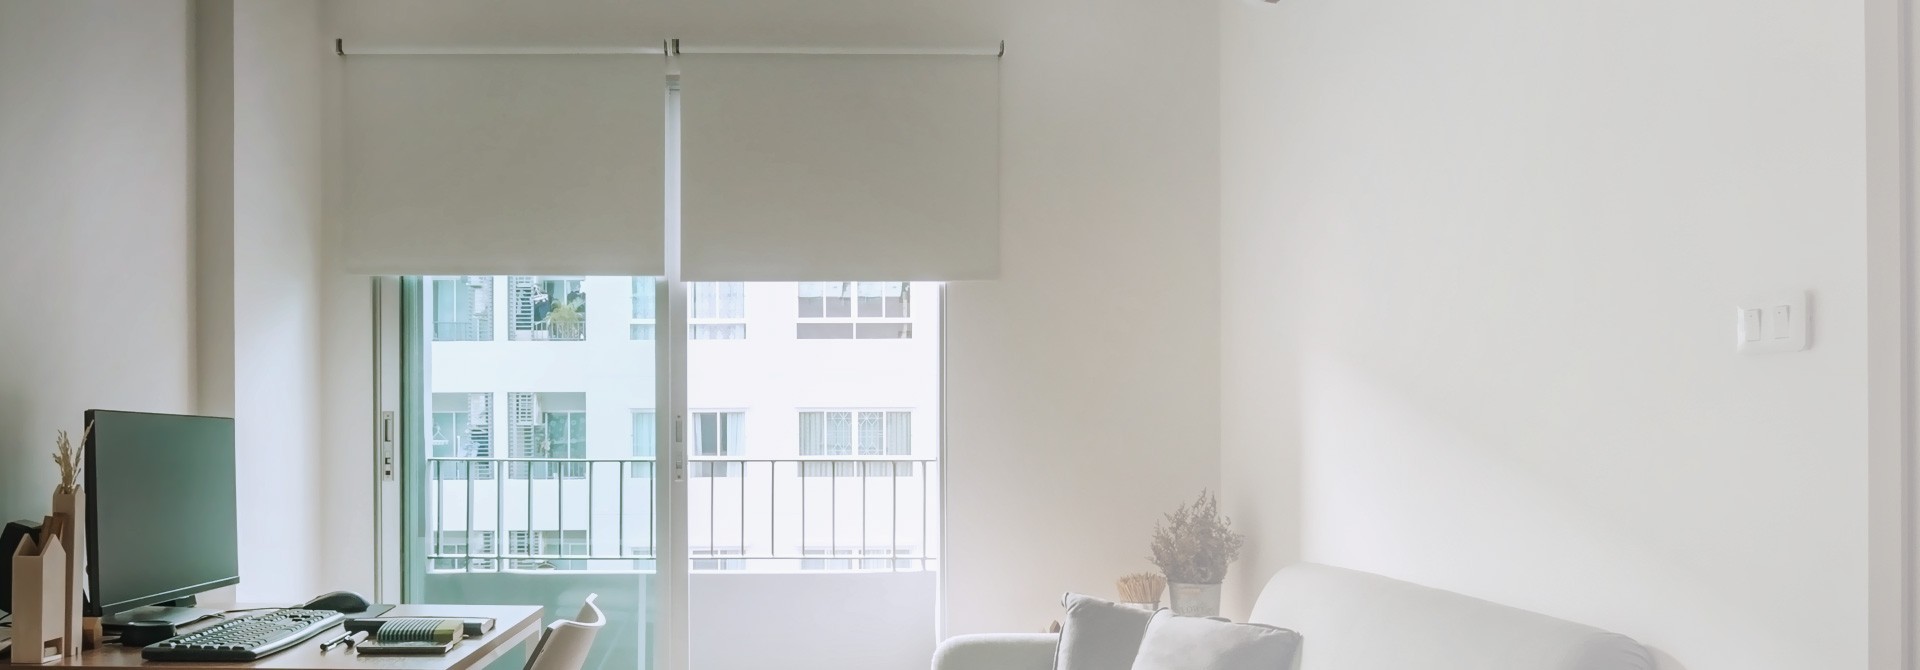 Small roller blinds